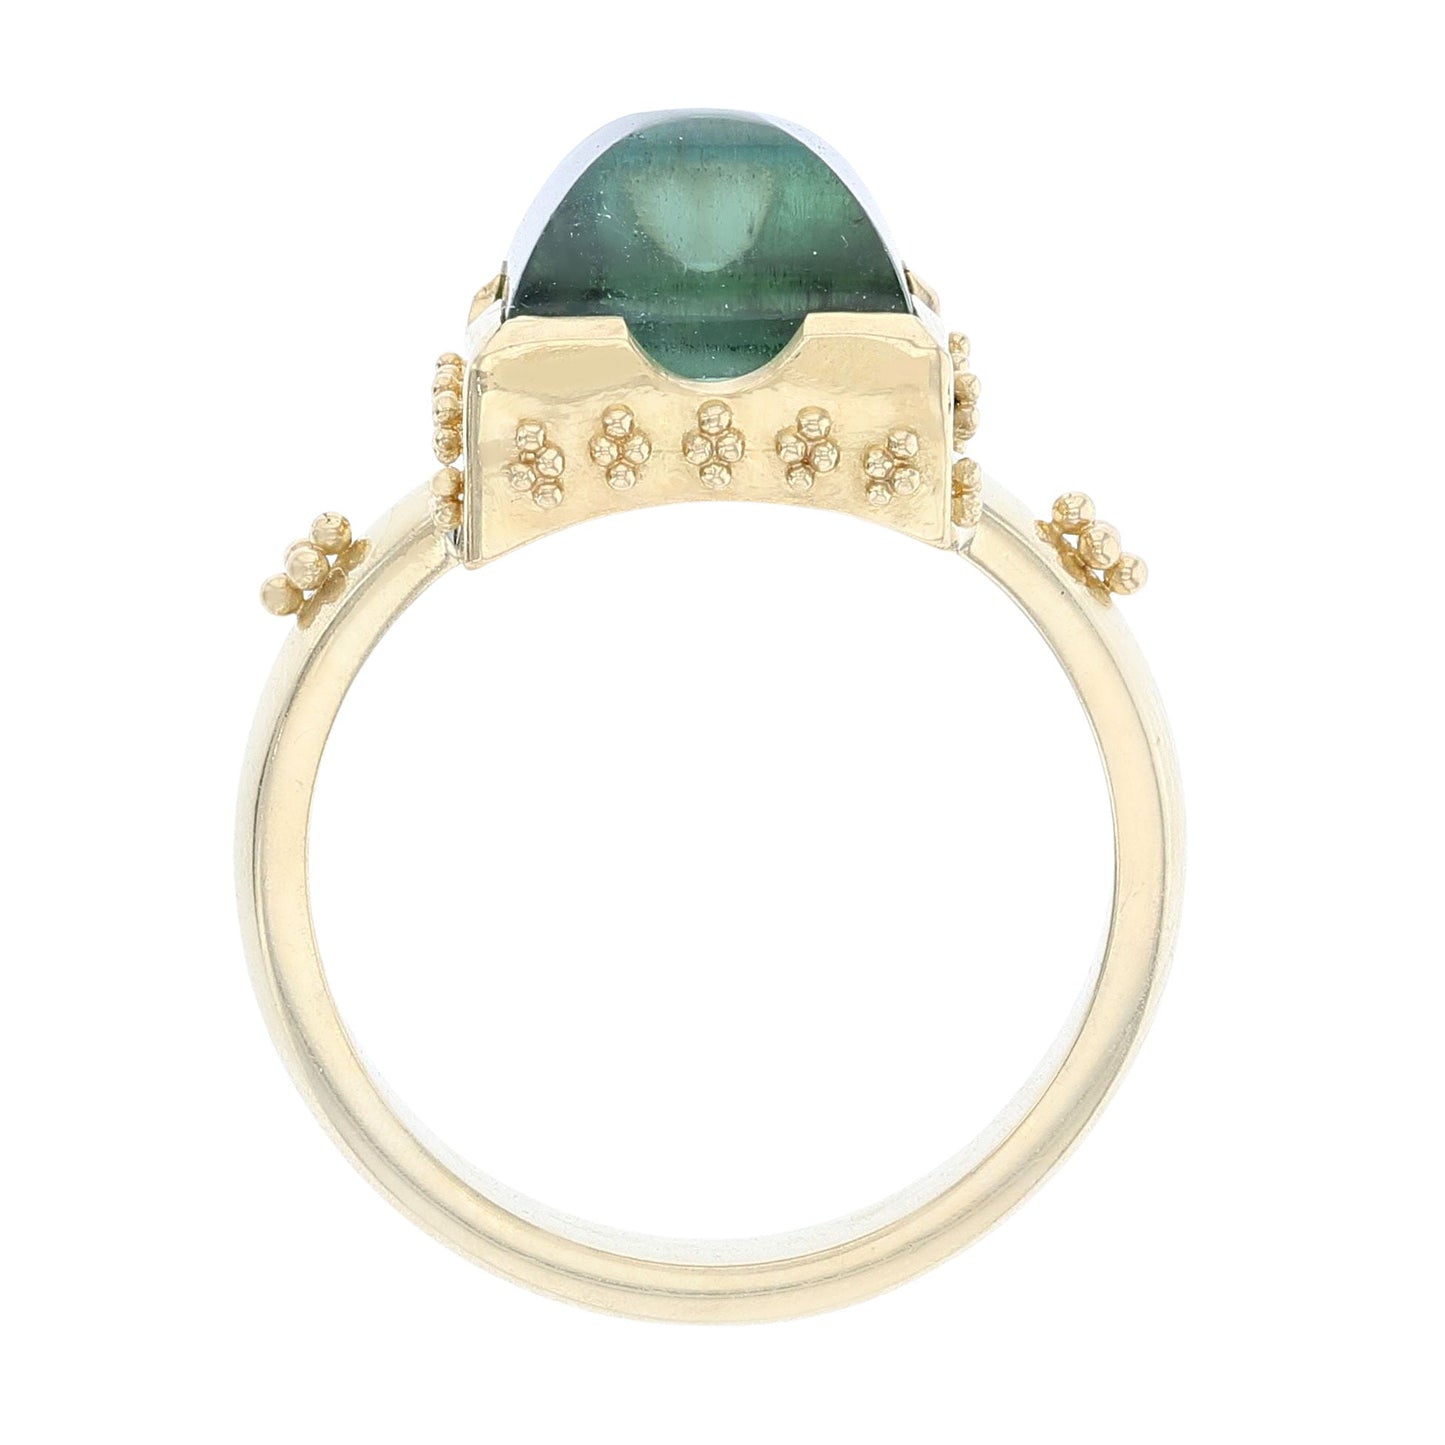 Granualated Green Tourmaline Ring by George Fox Gallery View